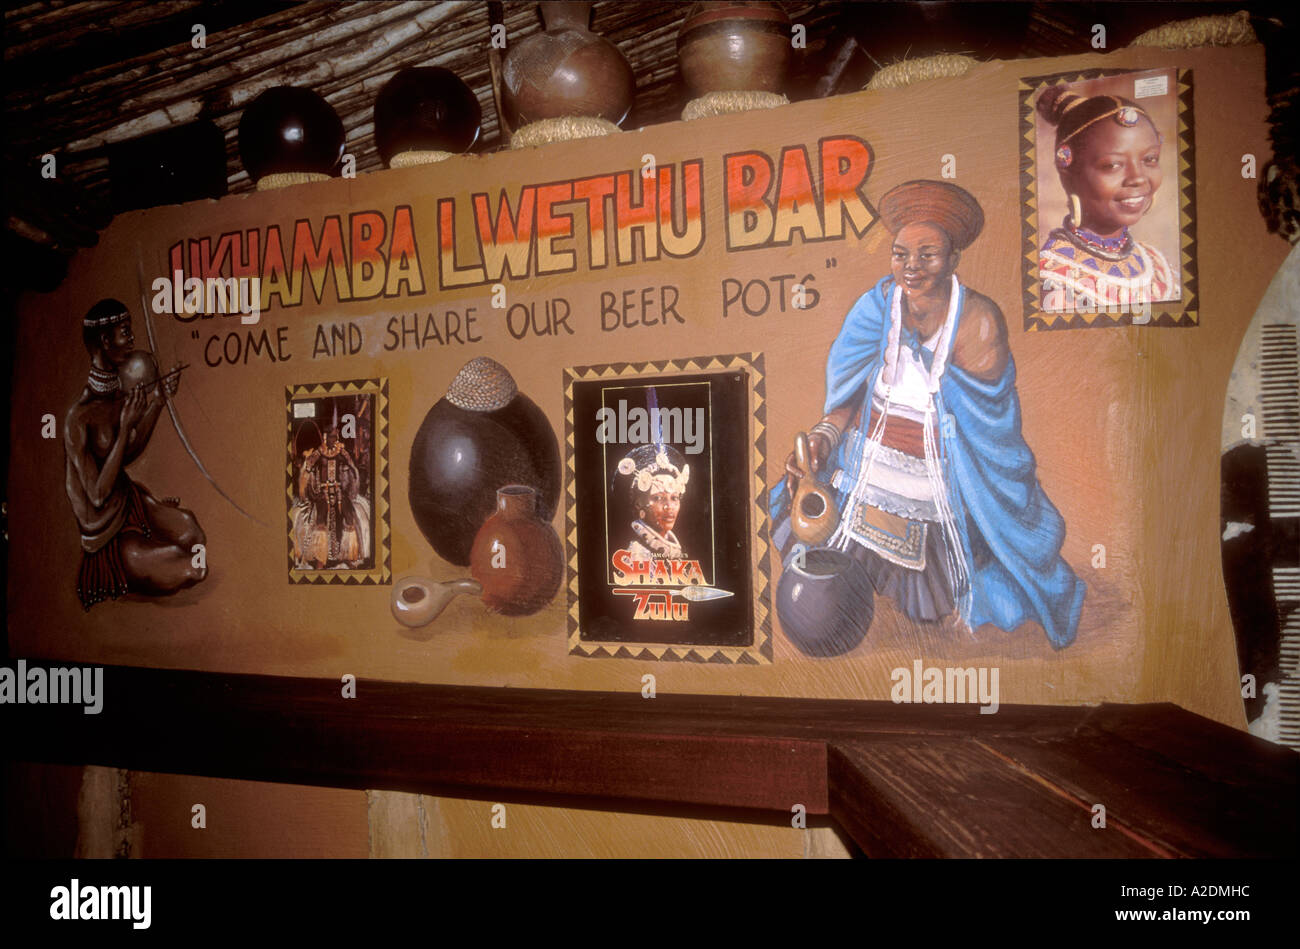 Images on wall of Zulu bar Stock Photo